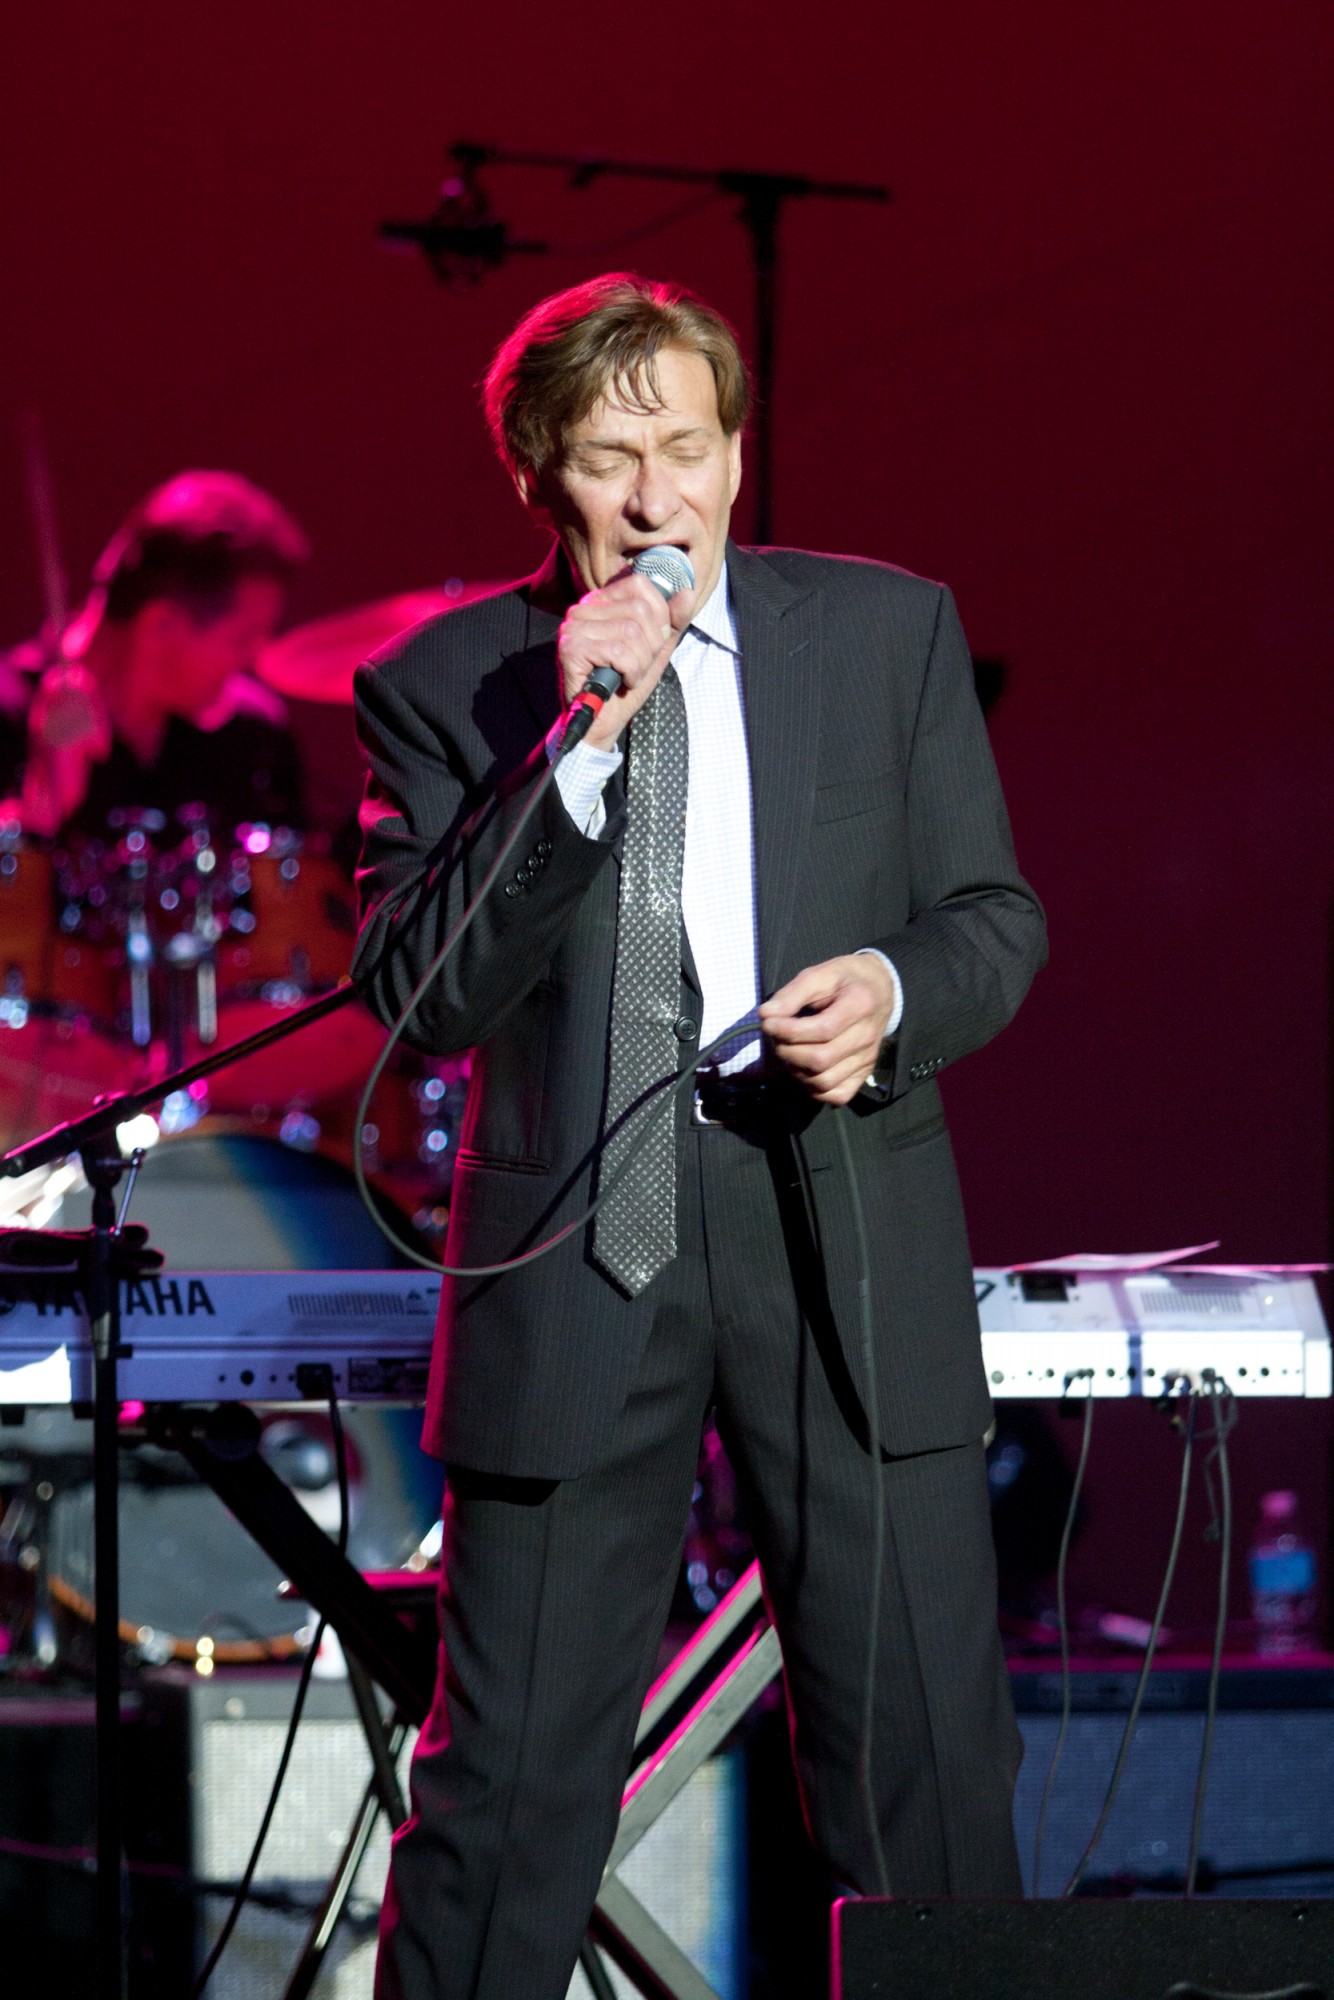 Bobby Caldwell Wallpapers